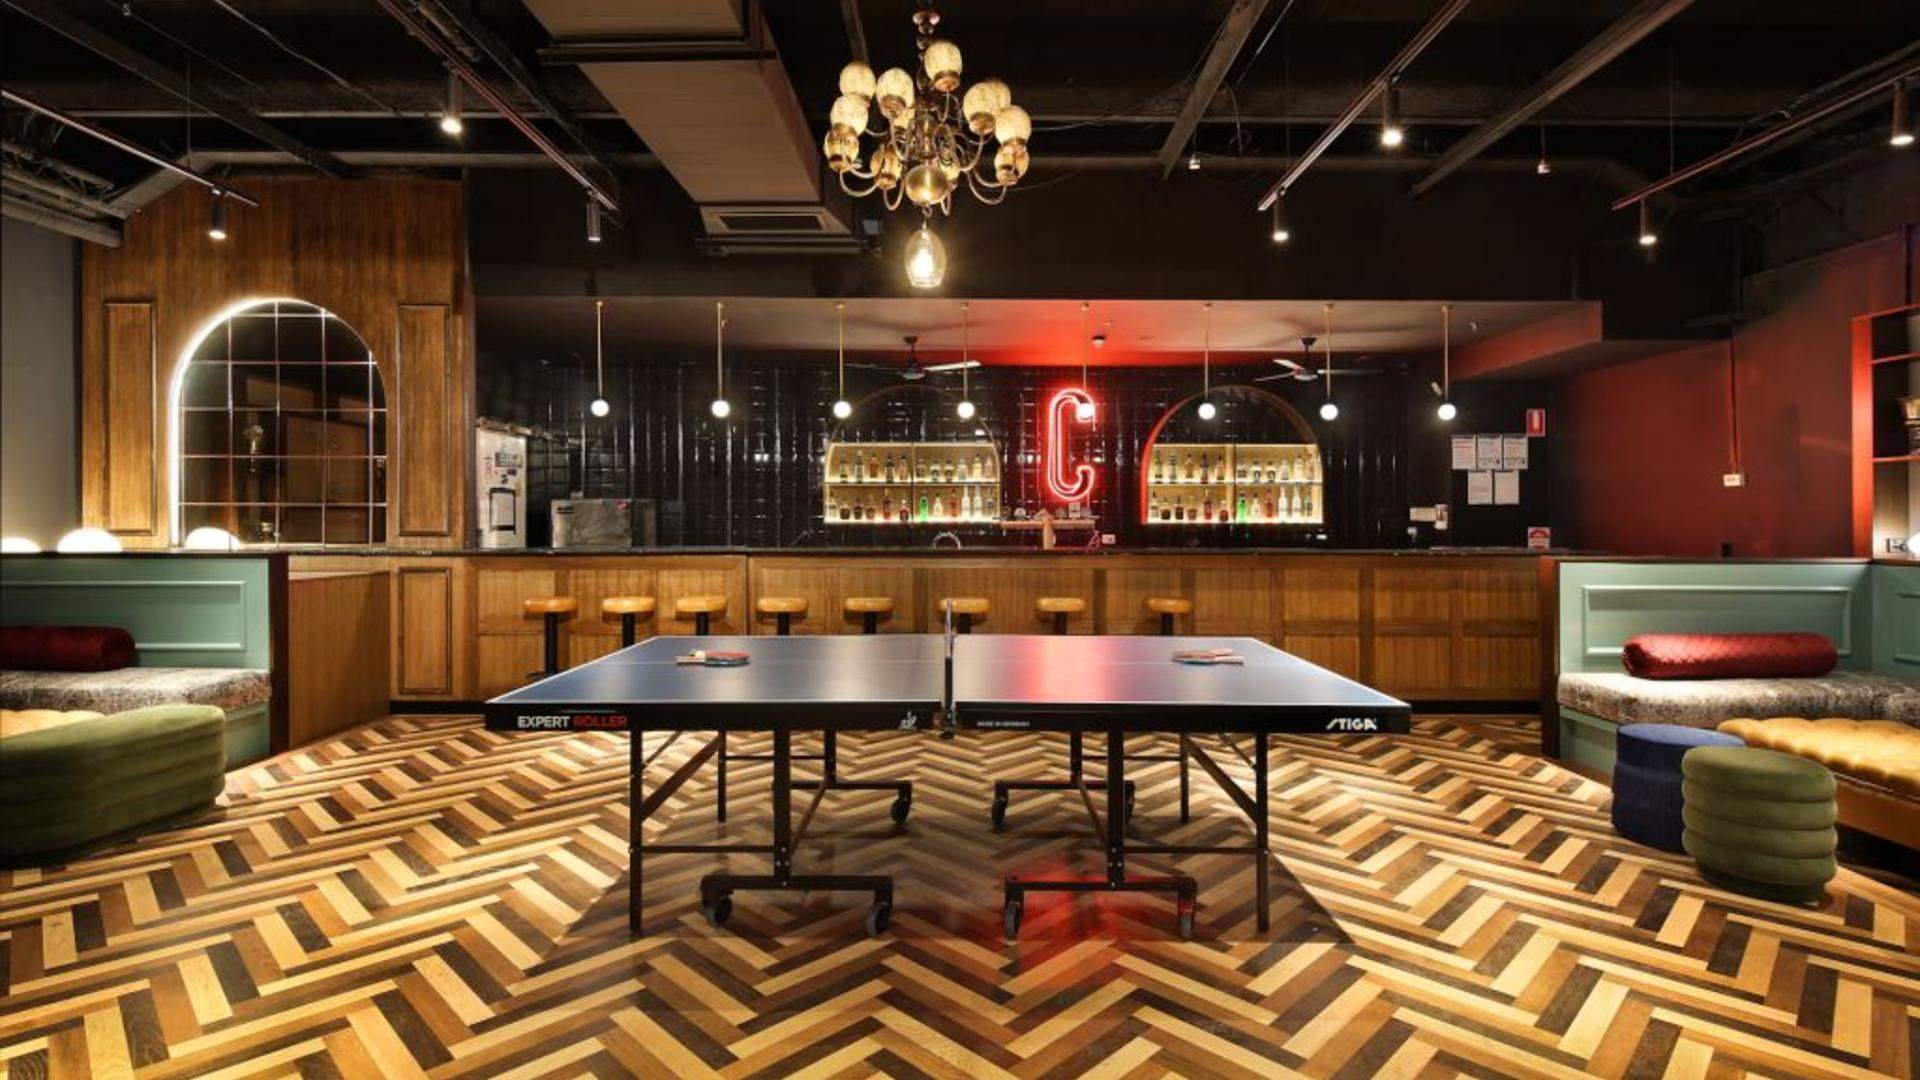 Ballers Clubhouse Is the CBD's Huge New Venue Devoted to Bar Sports